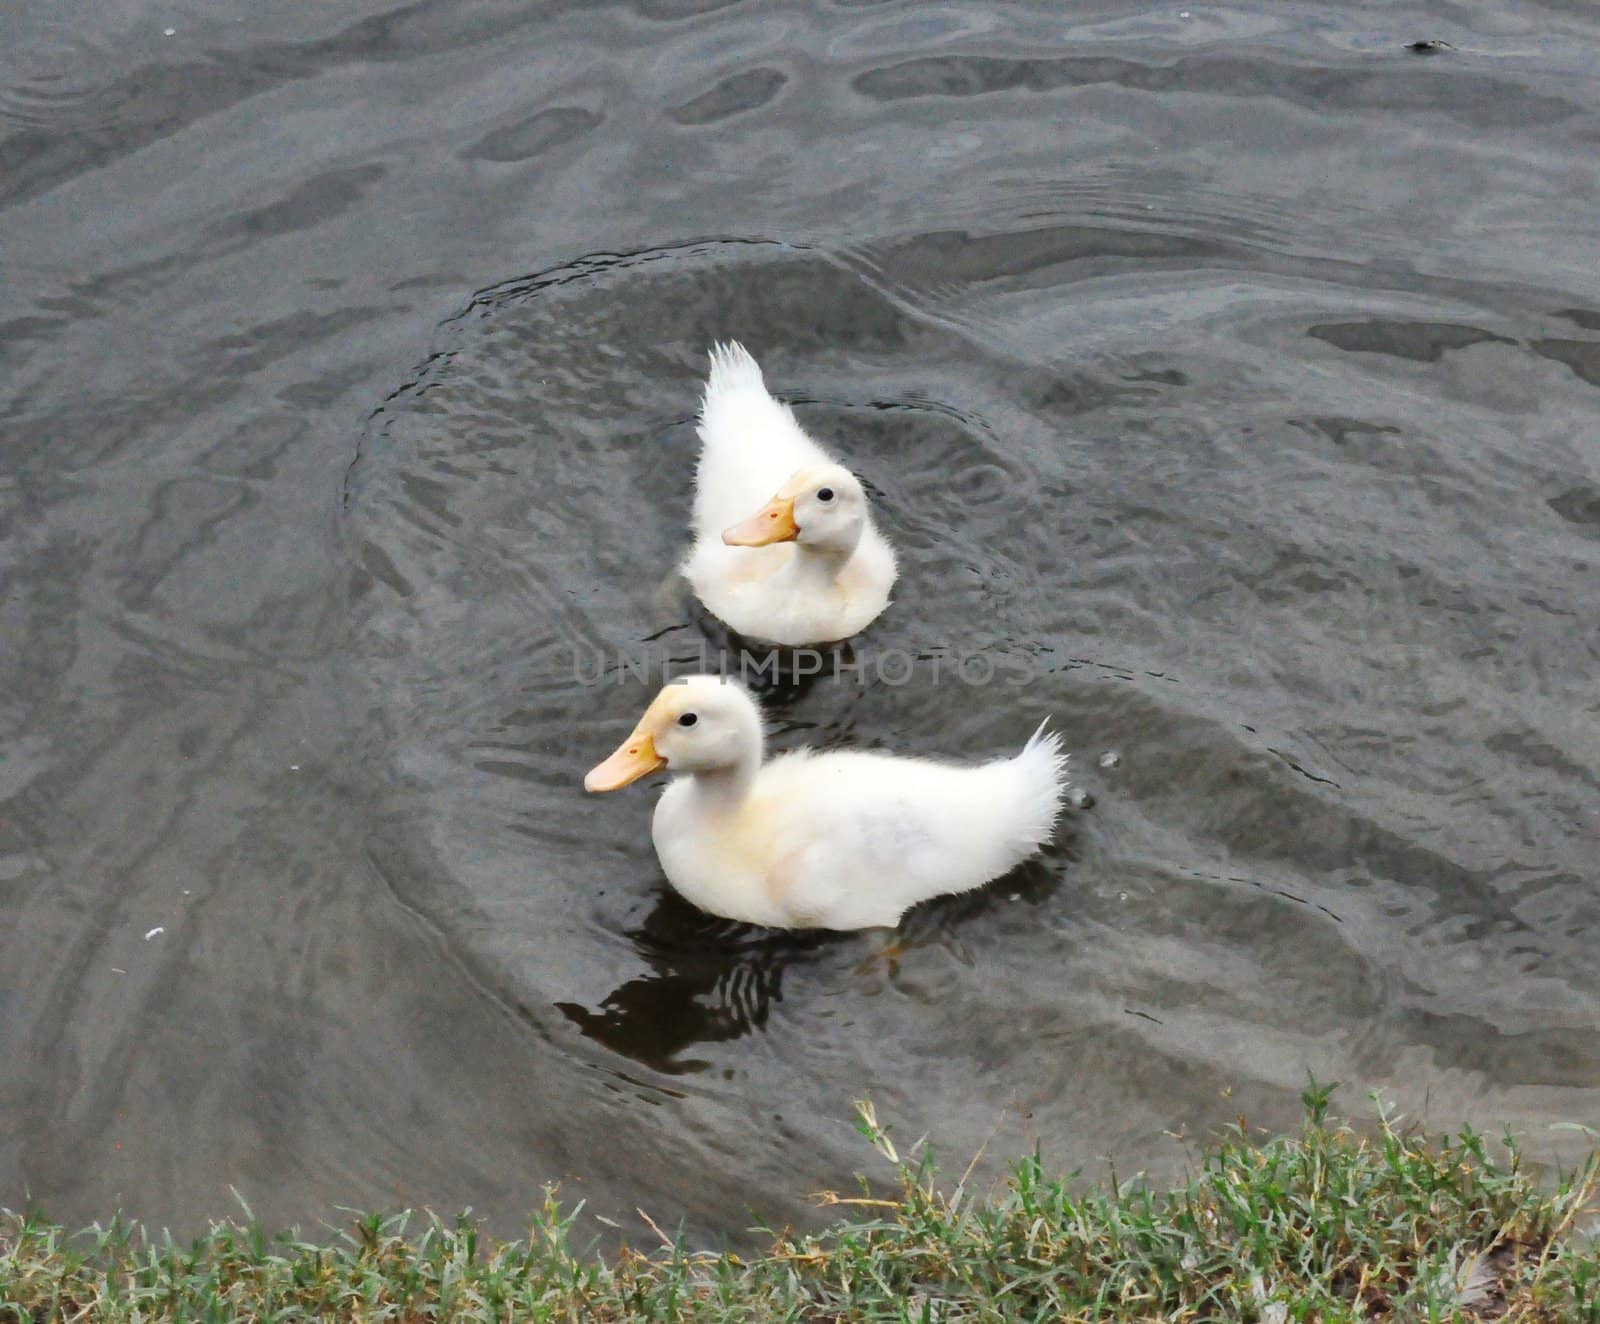 Two Ducks Swimming by RefocusPhoto